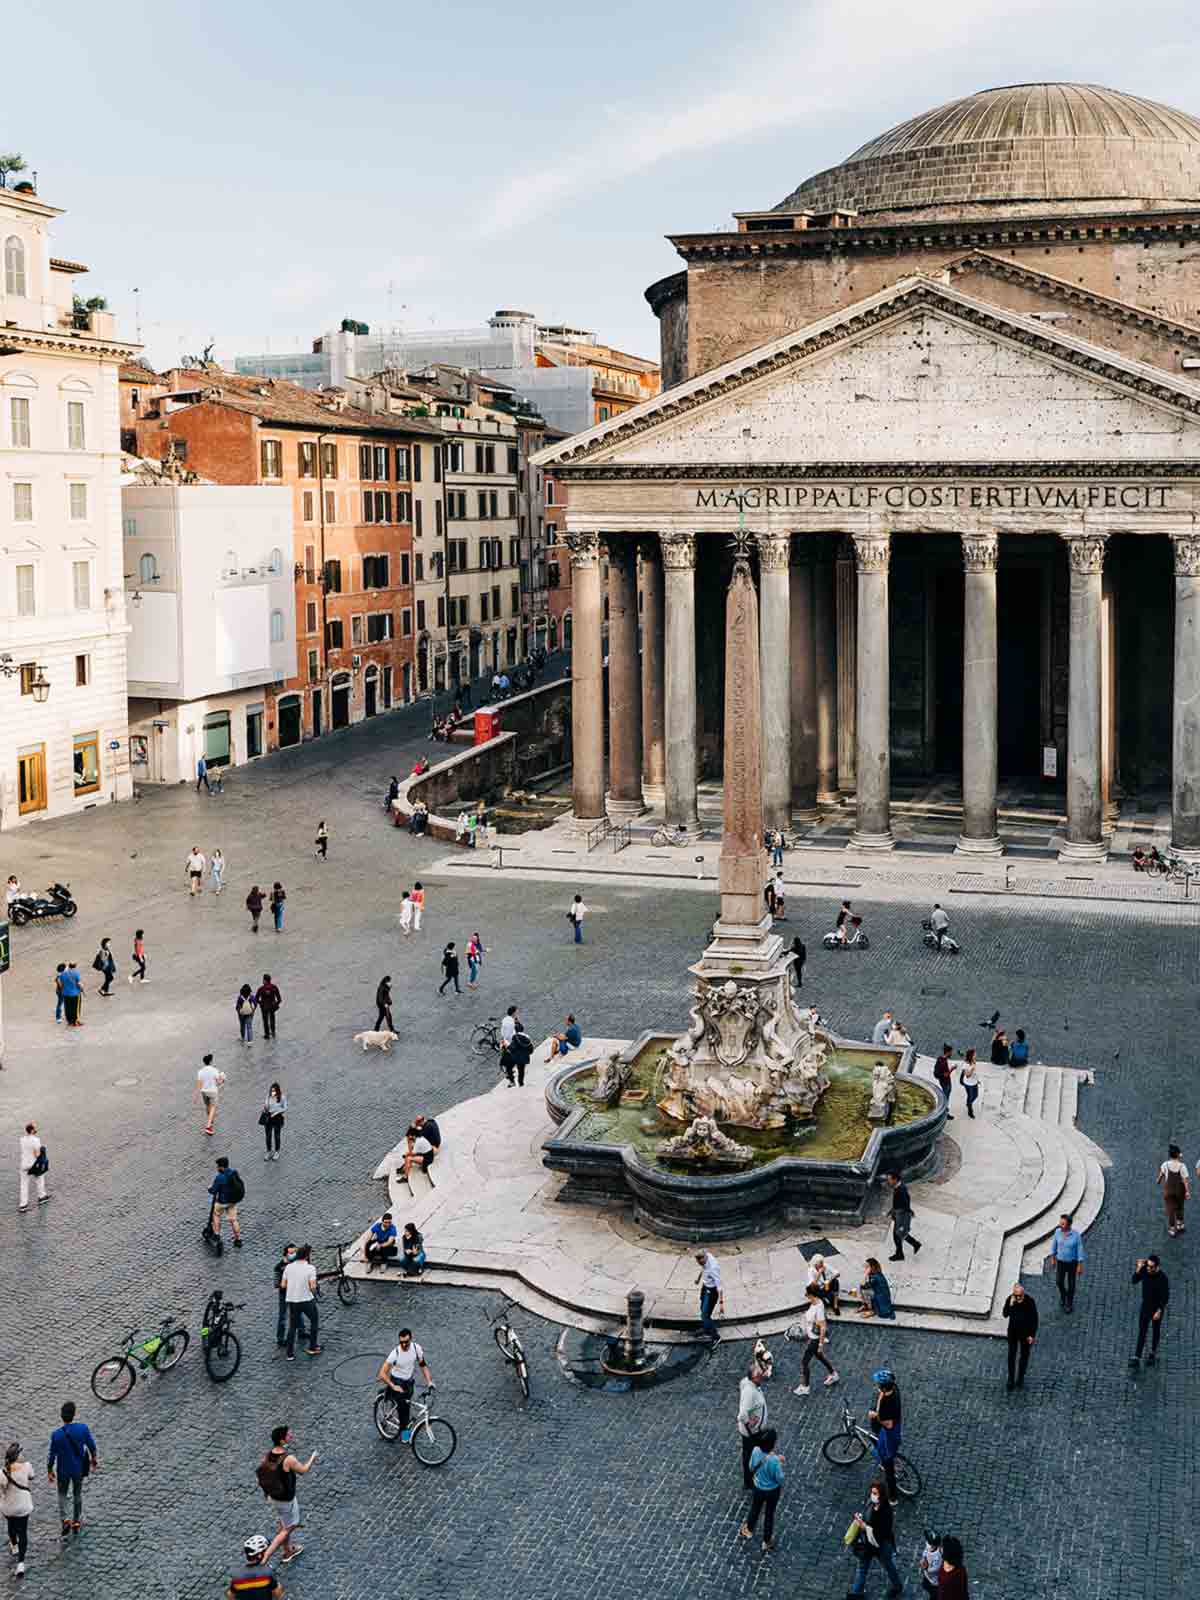 The Pantheon Building in Rome 